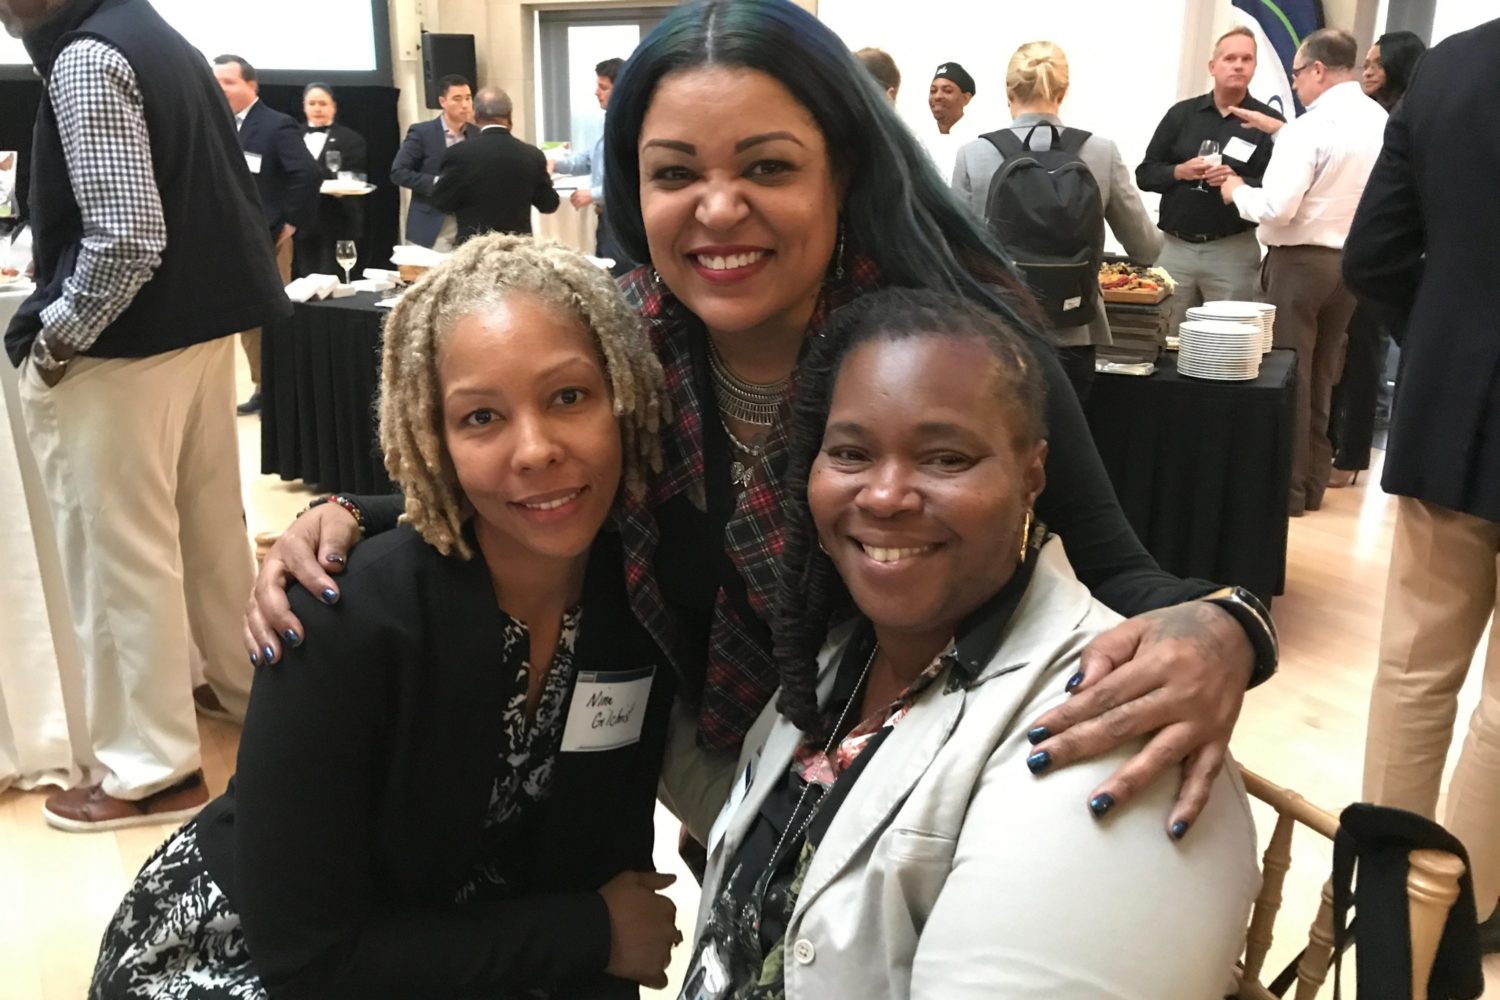 Nina Gilchrist, Chef Lozita King, and Dione Simmons (left to right) pose at the RAMW event where ProStart was announced.